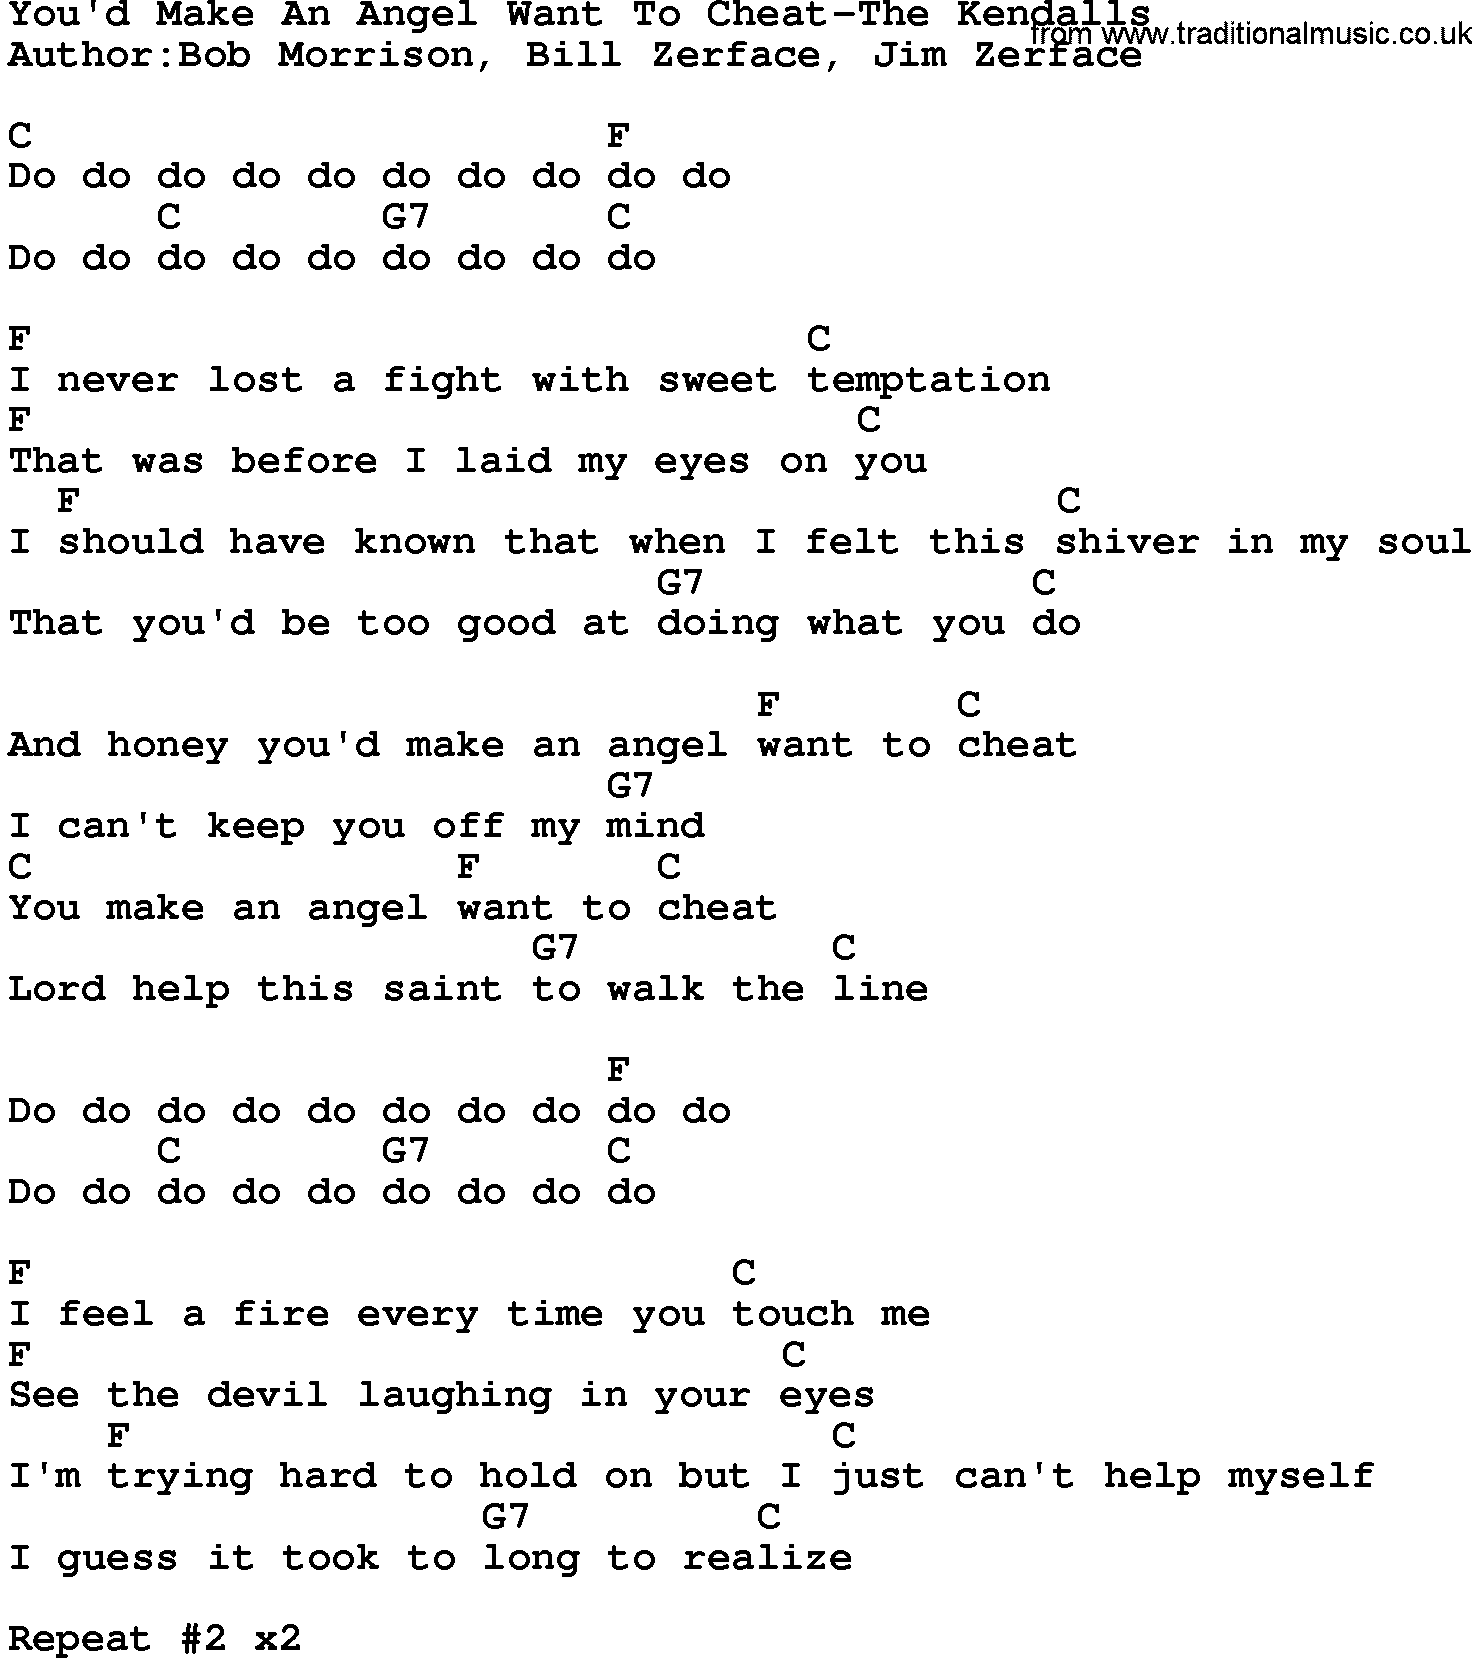 Country music song: You'd Make An Angel Want To Cheat-The Kendalls lyrics and chords